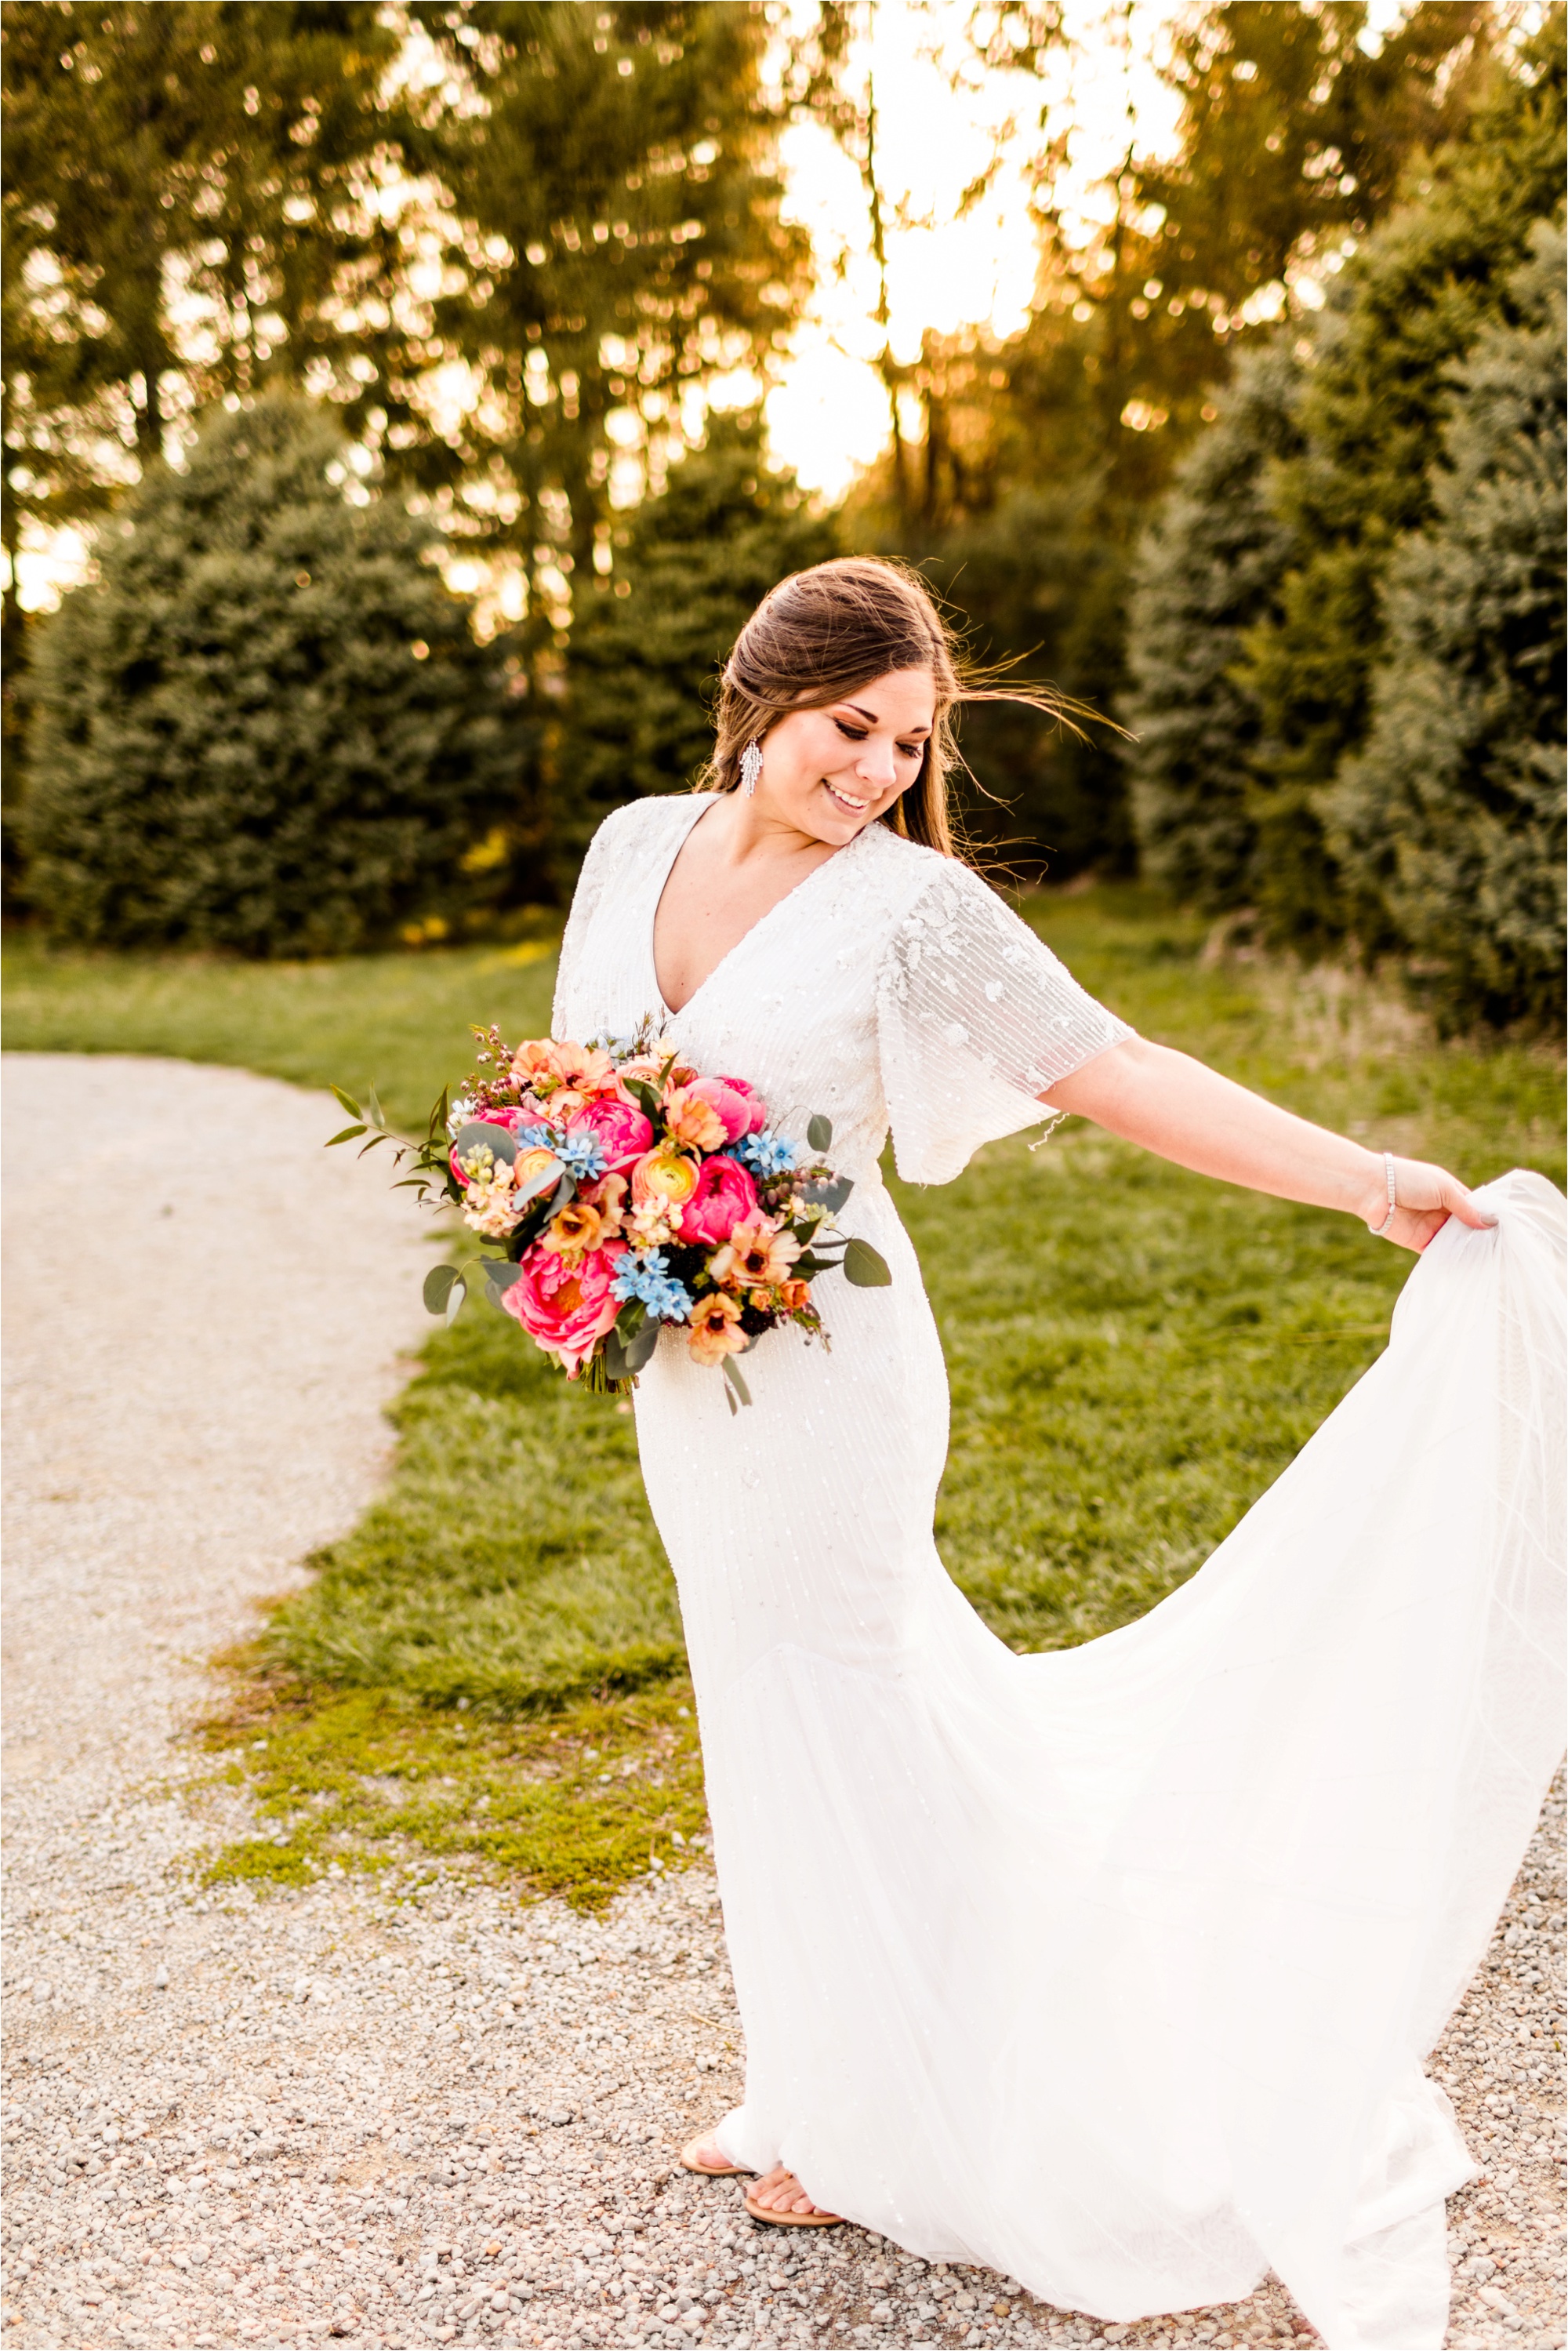 Caitlin and Luke Photography, Illinois Wedding Photographers, Champaign Wedding Photographers, Bloomington Normal Wedding Photographers, Romantic Red and Pink Sunset Styled Shoot_9588.jpg